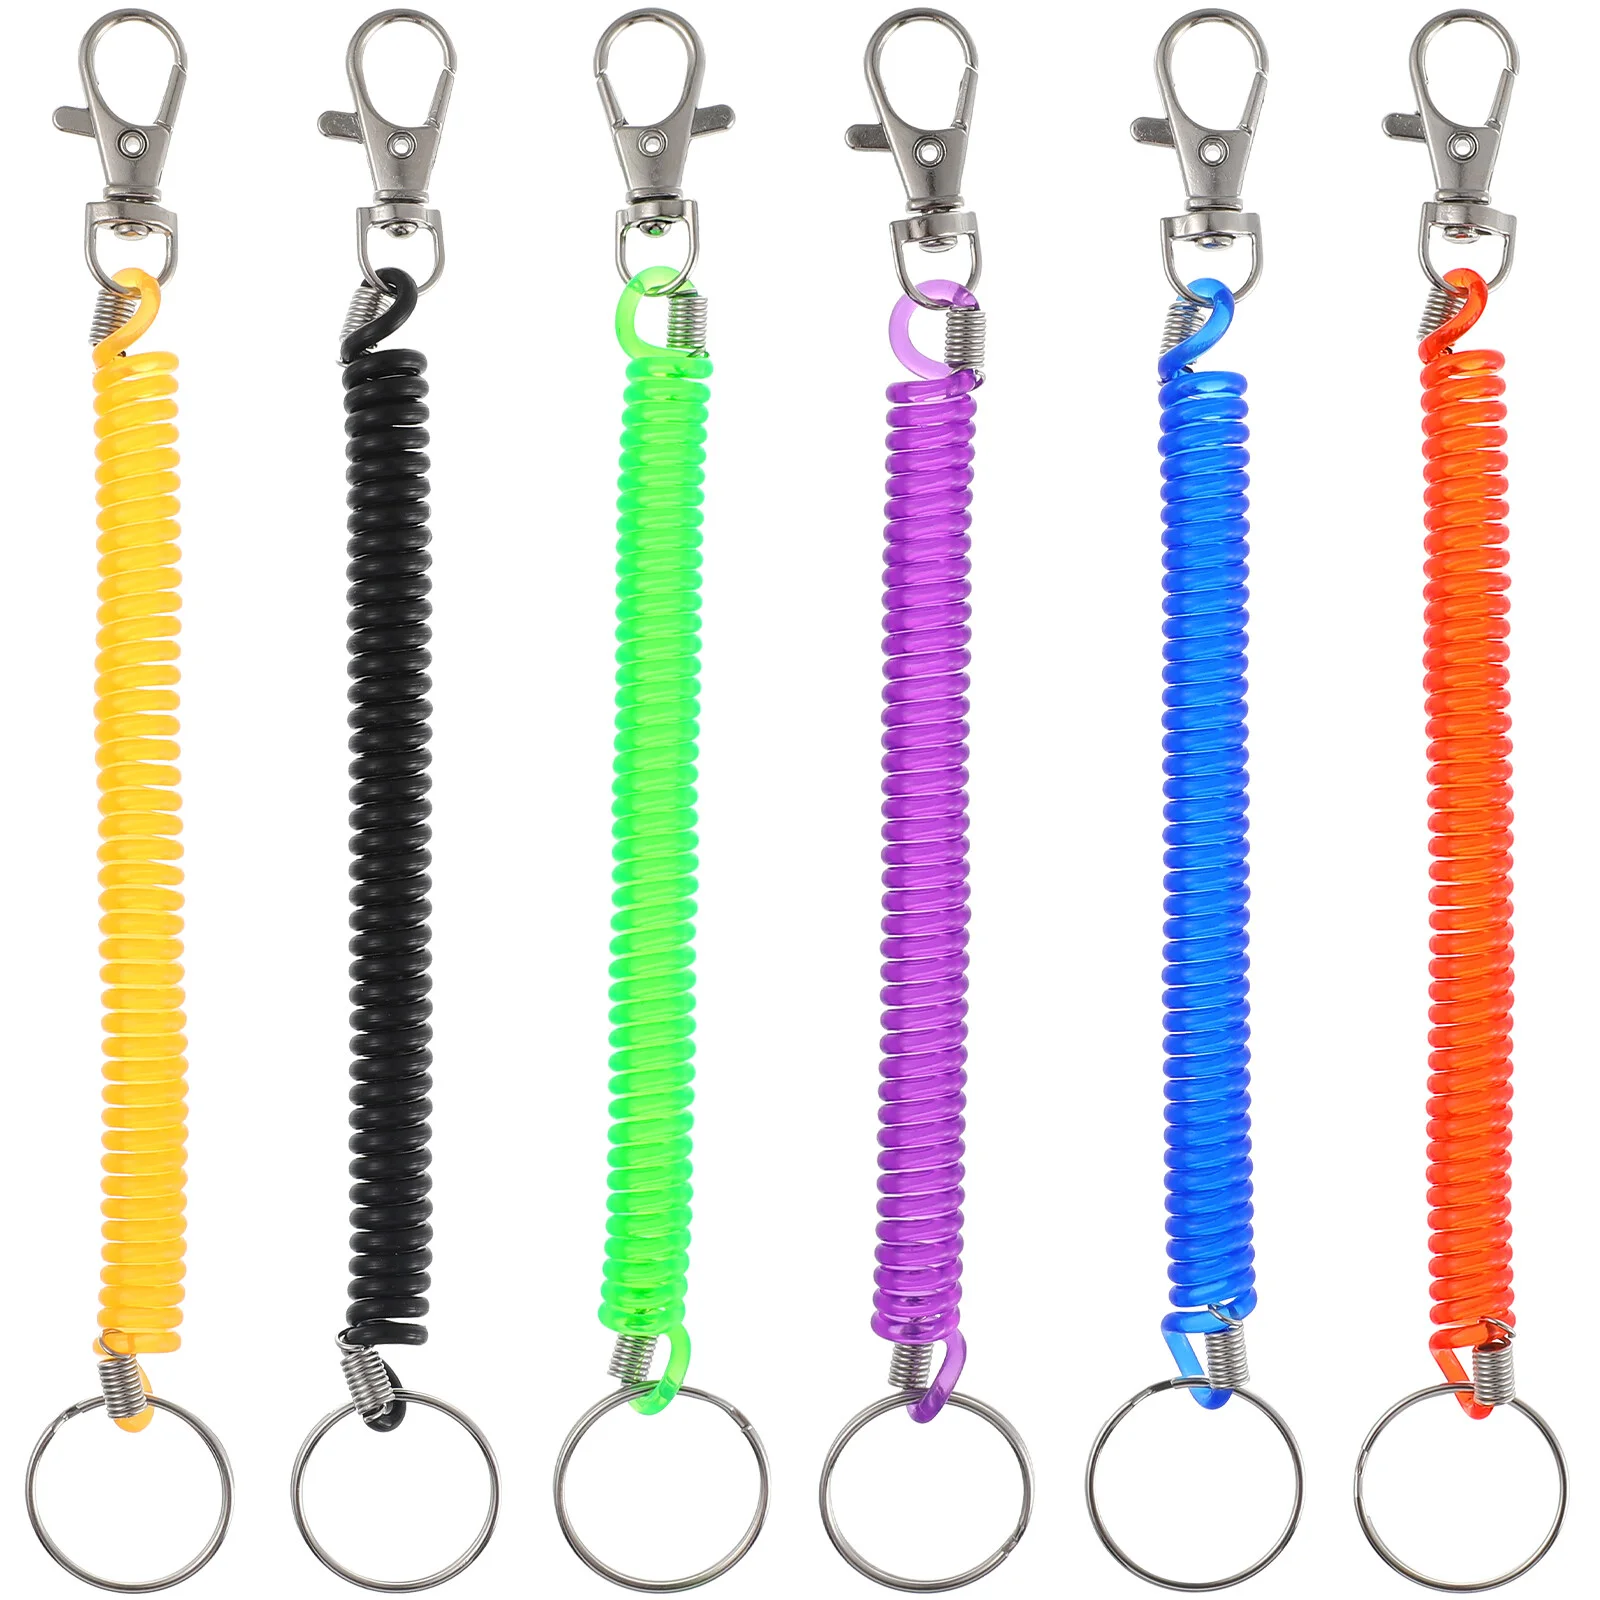 

12 Spring Coil Keychain Anti Colourful Spring Keychain Portable Stretch Cord Key Ring with Lobster Clasp for Men